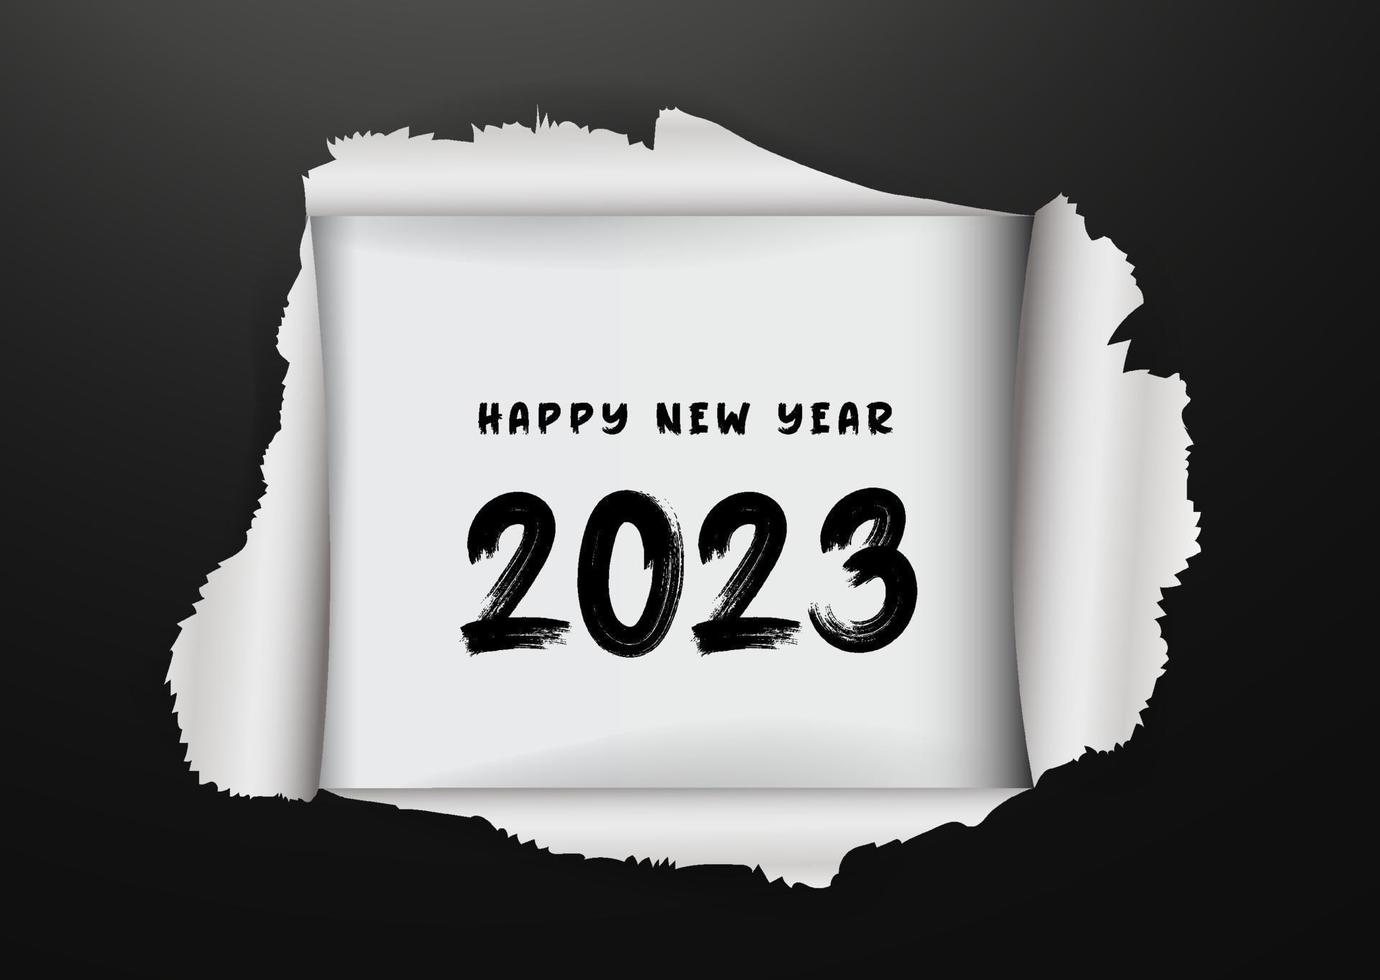 Vision 2023 New Year written behind a torn paper. Torn paper revealing the number 2023 vector